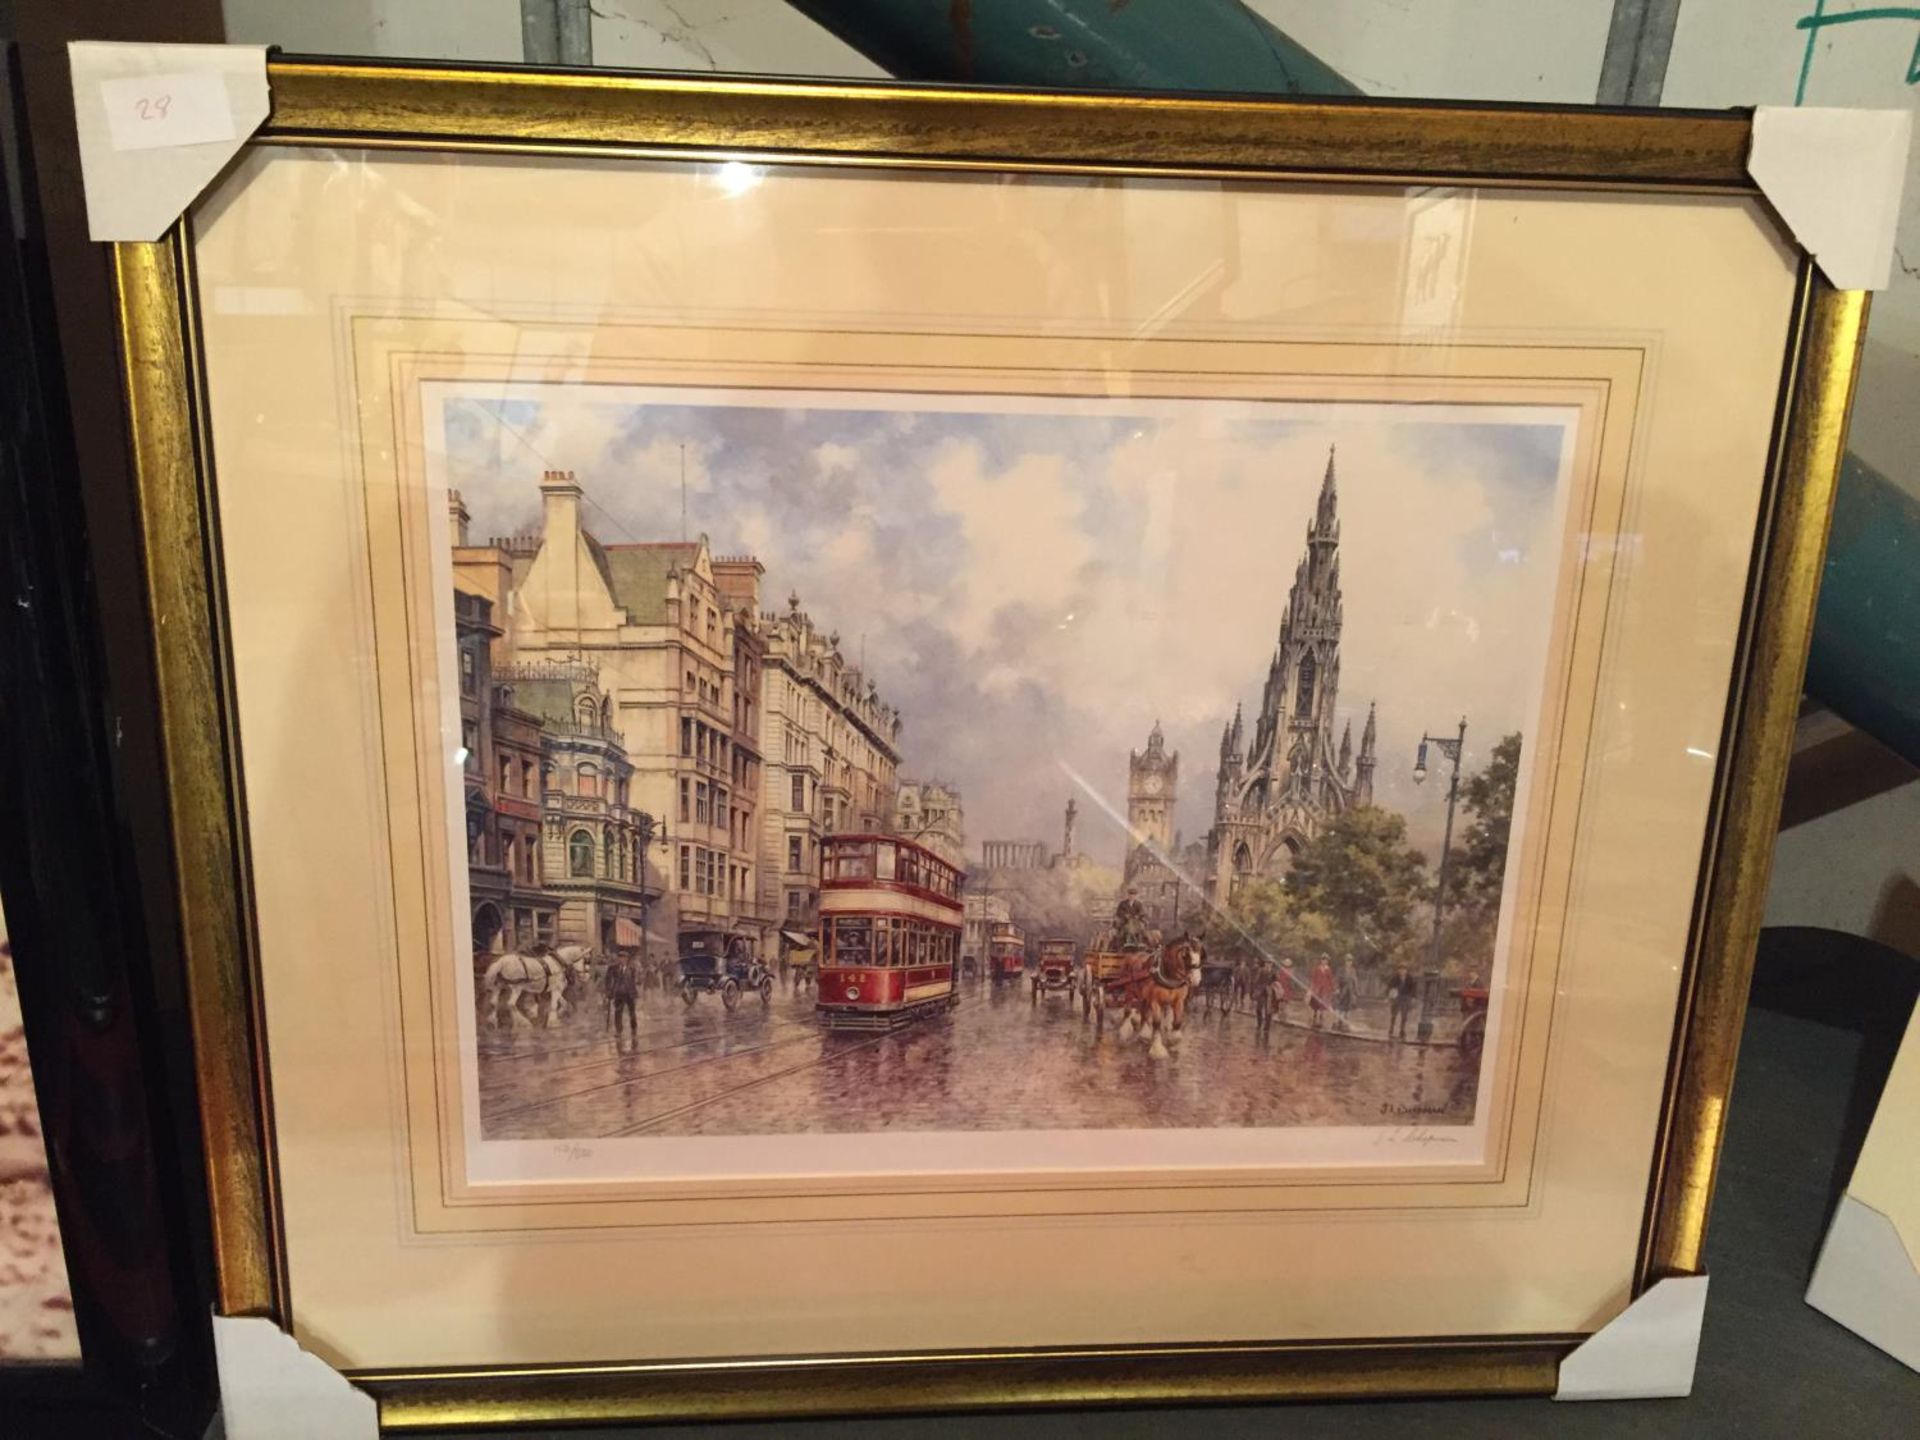 A FRAMED PRINT OF A VICTORIAN STREET SIGNED J L CHAPMAN LIMITED EDITION NUMBER 102/850